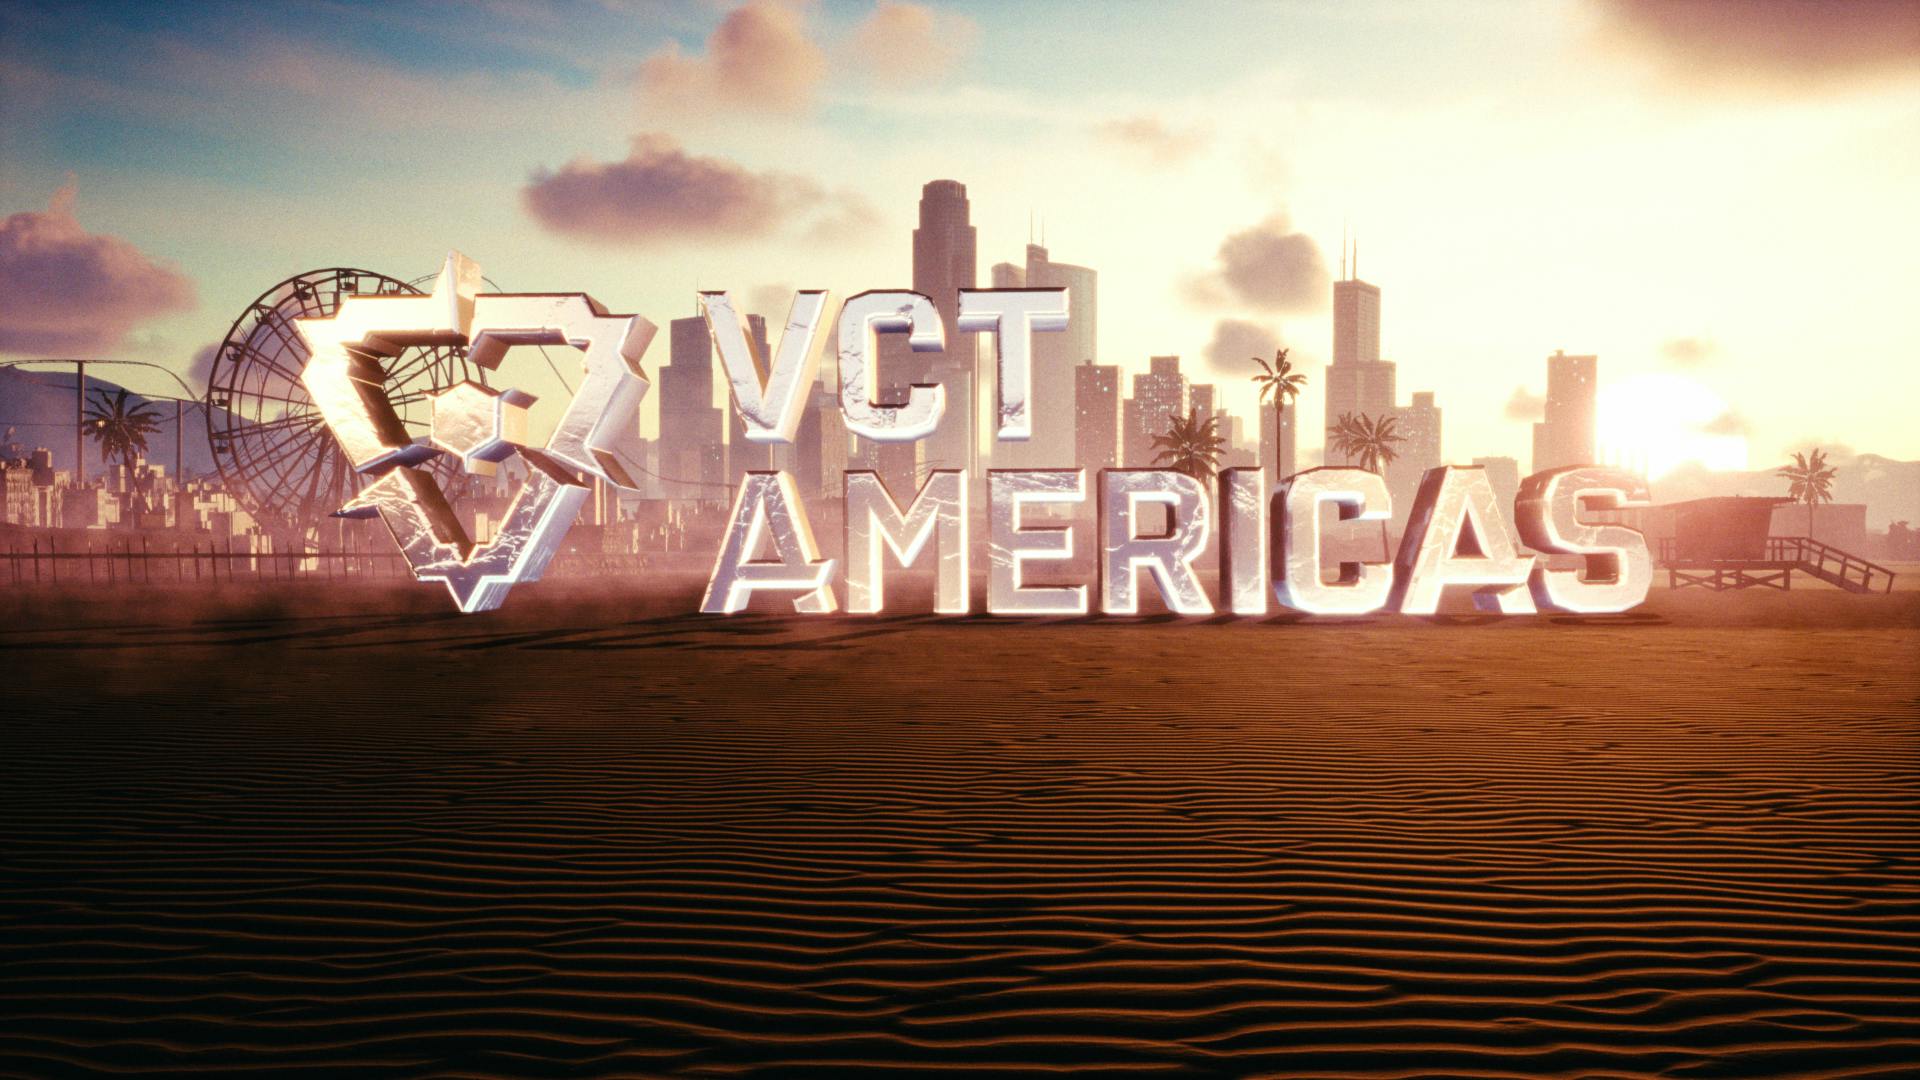 The image showcases the 'VCT AMERICAS' logo, representing the Valorant Champions Tour for the Americas region by Riot Games, set against a stylized Los Angeles backdrop. The metallic, three-dimensional logo is bathed in the warm glow of a setting or rising sun, casting long shadows over the rippled sand. Landmarks like a Ferris wheel and palm trees are silhouetted against the illuminated city skyline, capturing the essence of LA's coastal landscape and the competitive spirit of the gaming event.